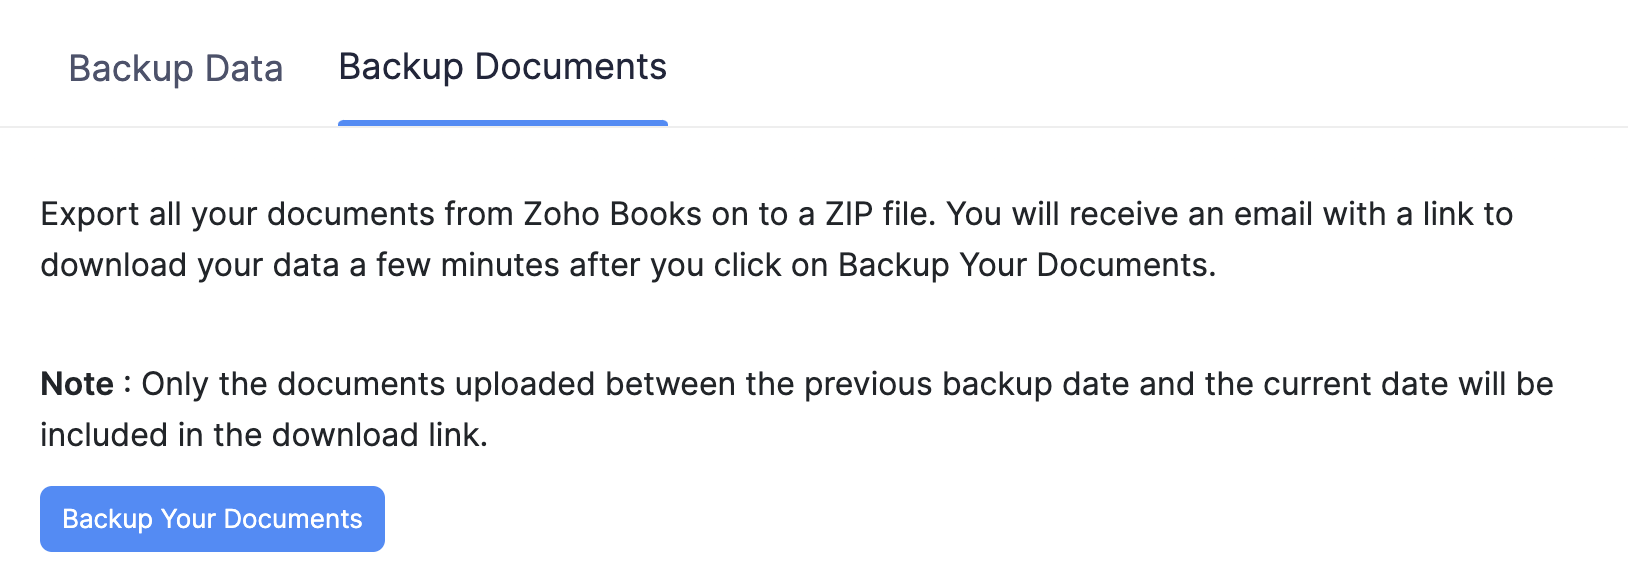 Click Backup Your Documents in the Backup Documents tab